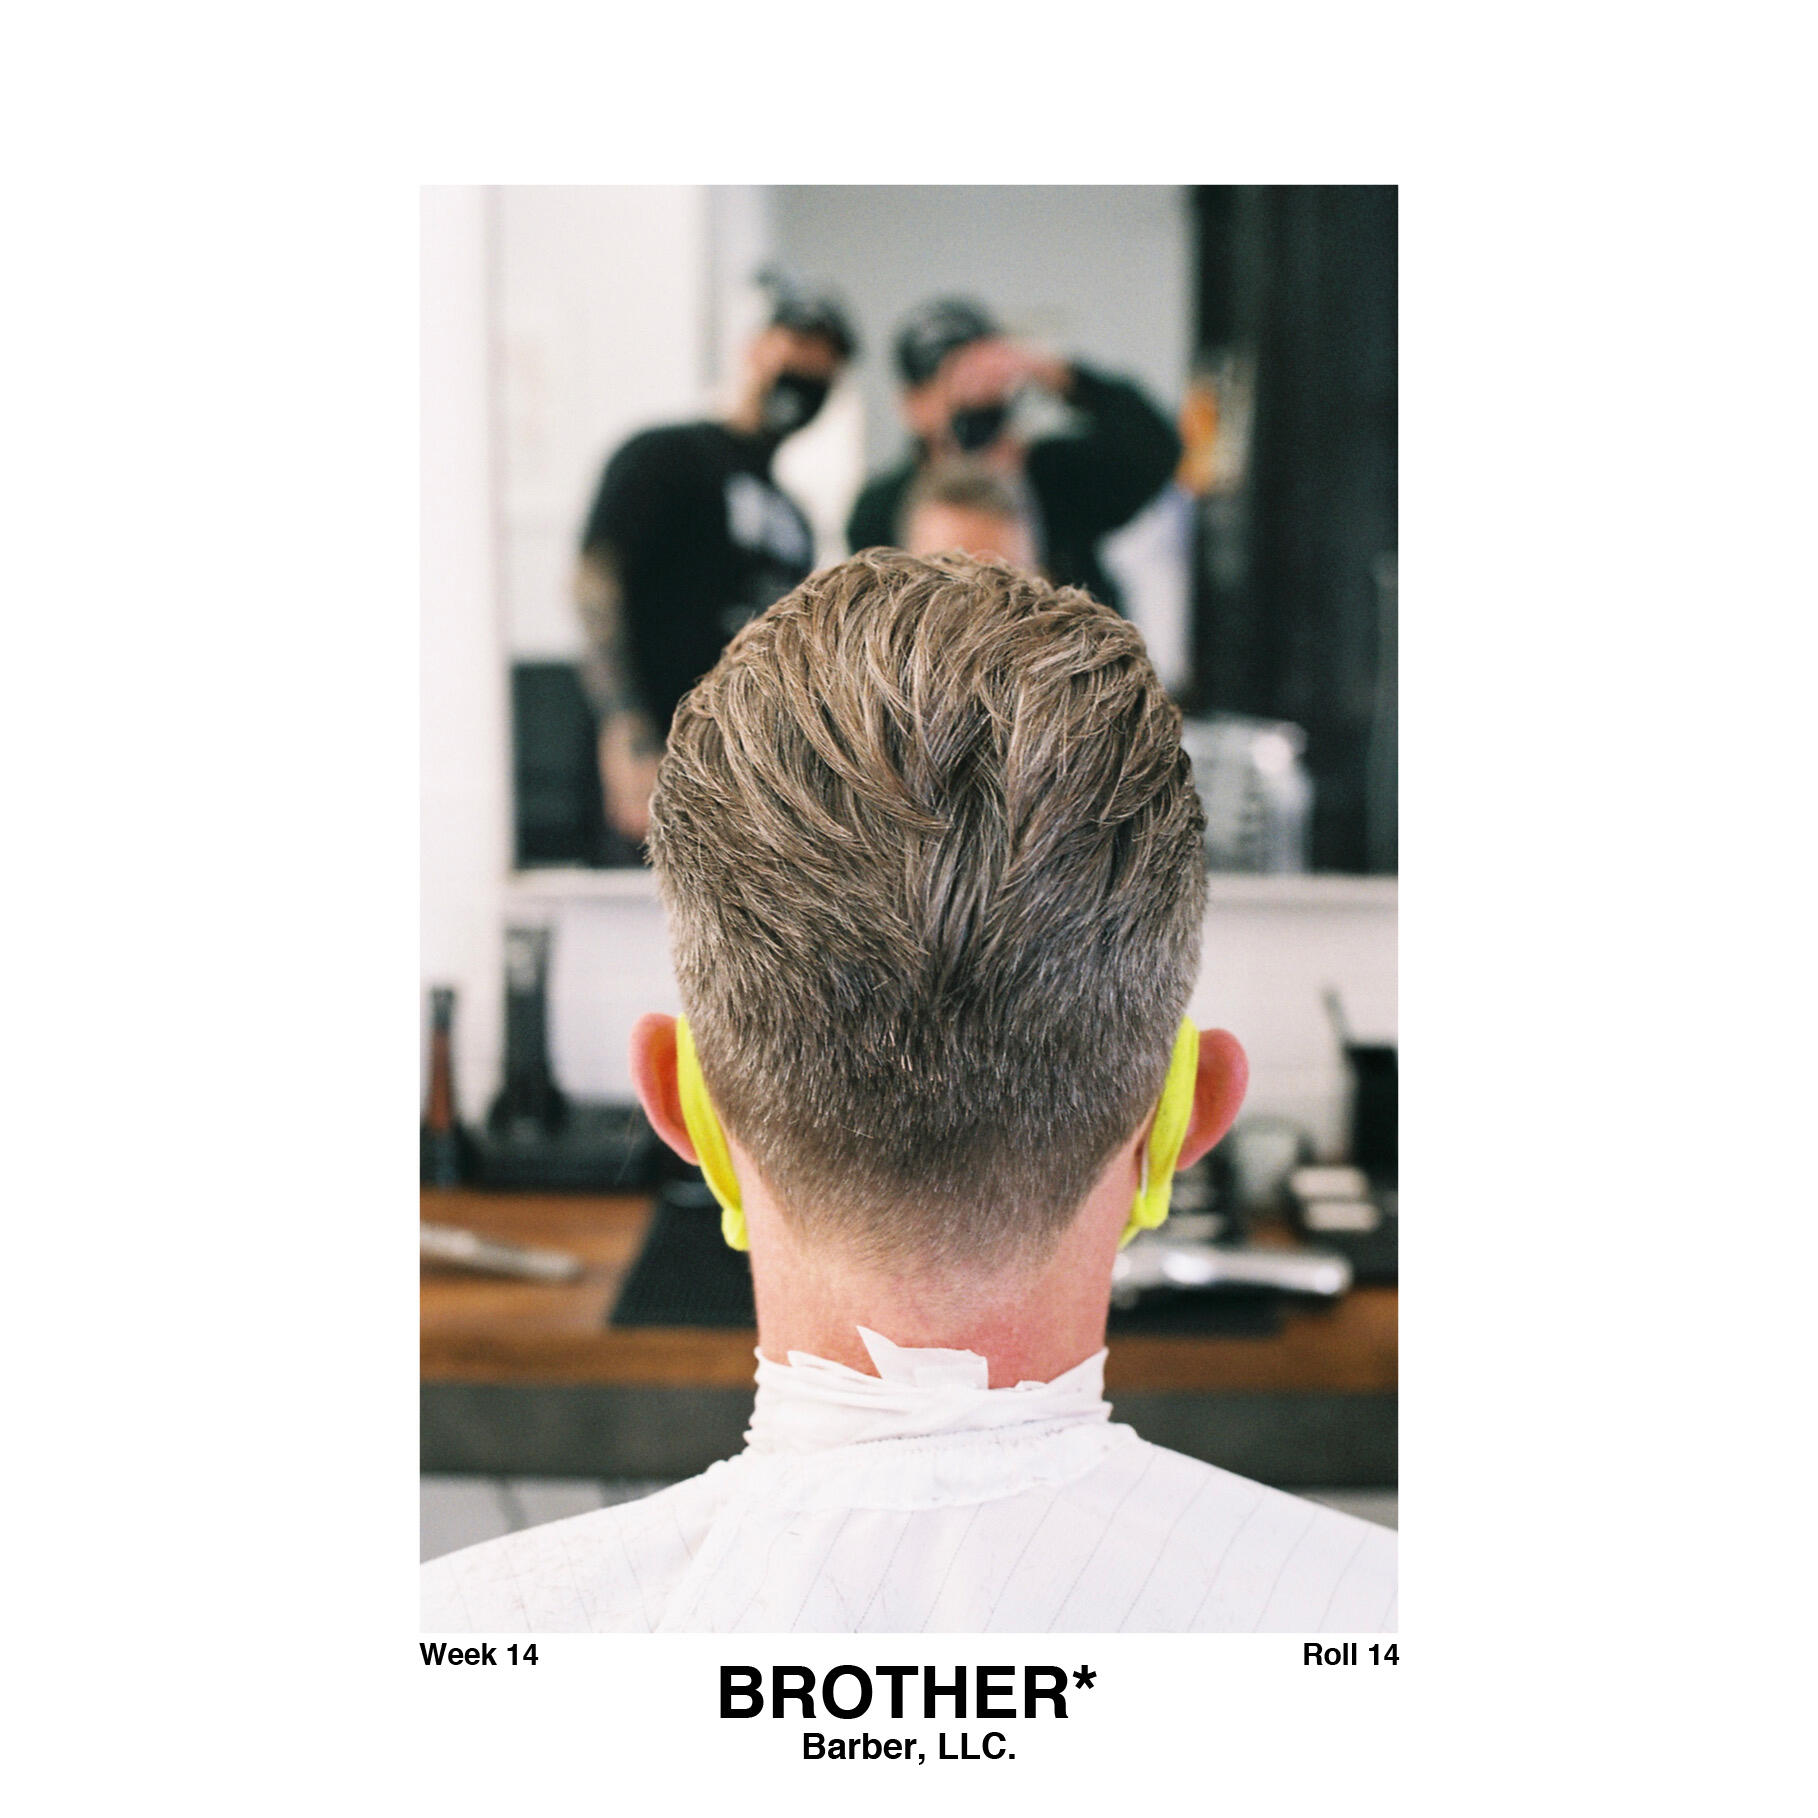 Brother Barber 1 W Allendale Ave, Allendale New Jersey 07401